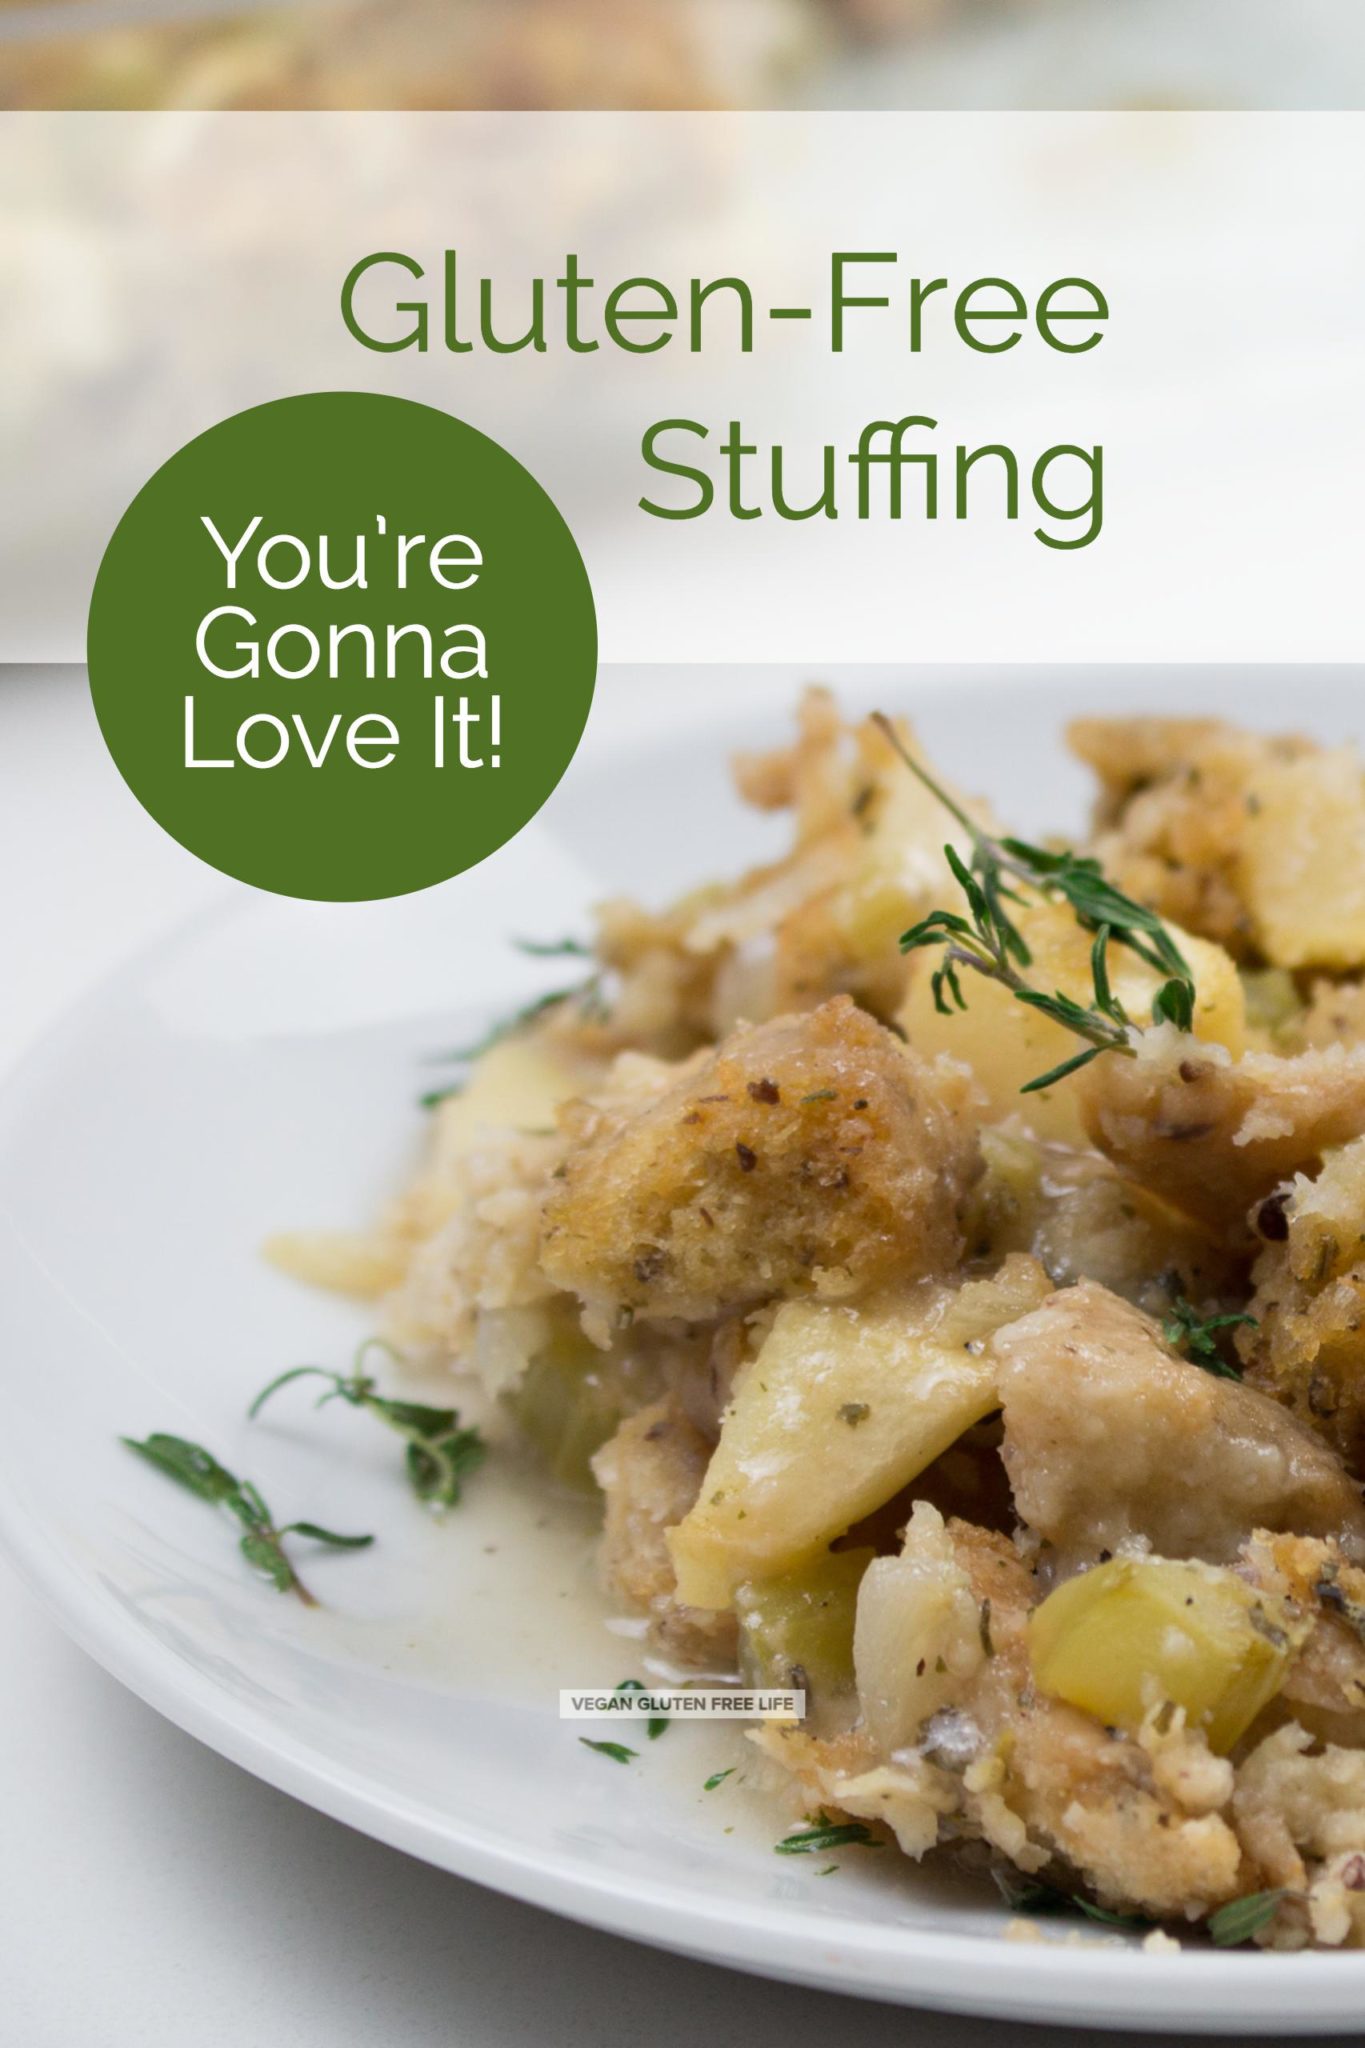 Gluten-free stuffing is an iconic holiday dish. The aromas of sage, rosemary, thyme, onion, garlic, and gravy will make your mouth water.www.veganglutenfreelife.com/gluten-free-stuffing/